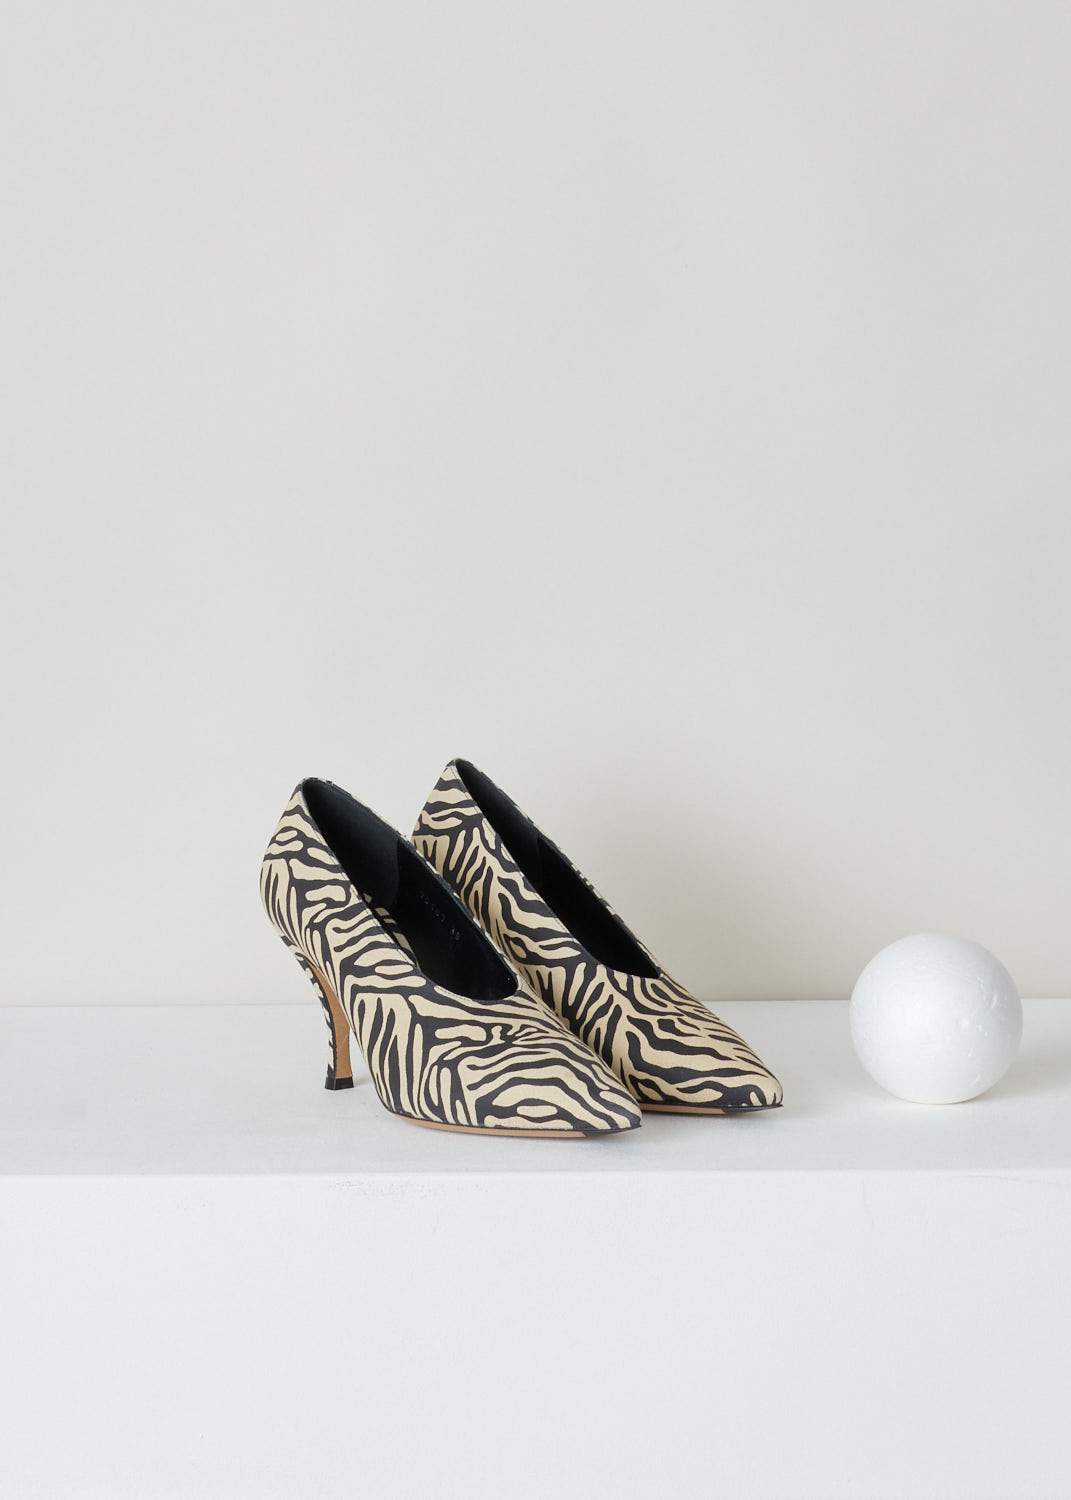 Dries van Noten, Zebra print pumps in black and white, WS27_187_H80_QU102_ECRU005, white black, front, Leather printed with a zebra print, featuring an pointed toe section and tapered heels. this pumps would fit any occasion either with a dress or some pants.

Heel height: 8.5 cm / 3.3 inch. 